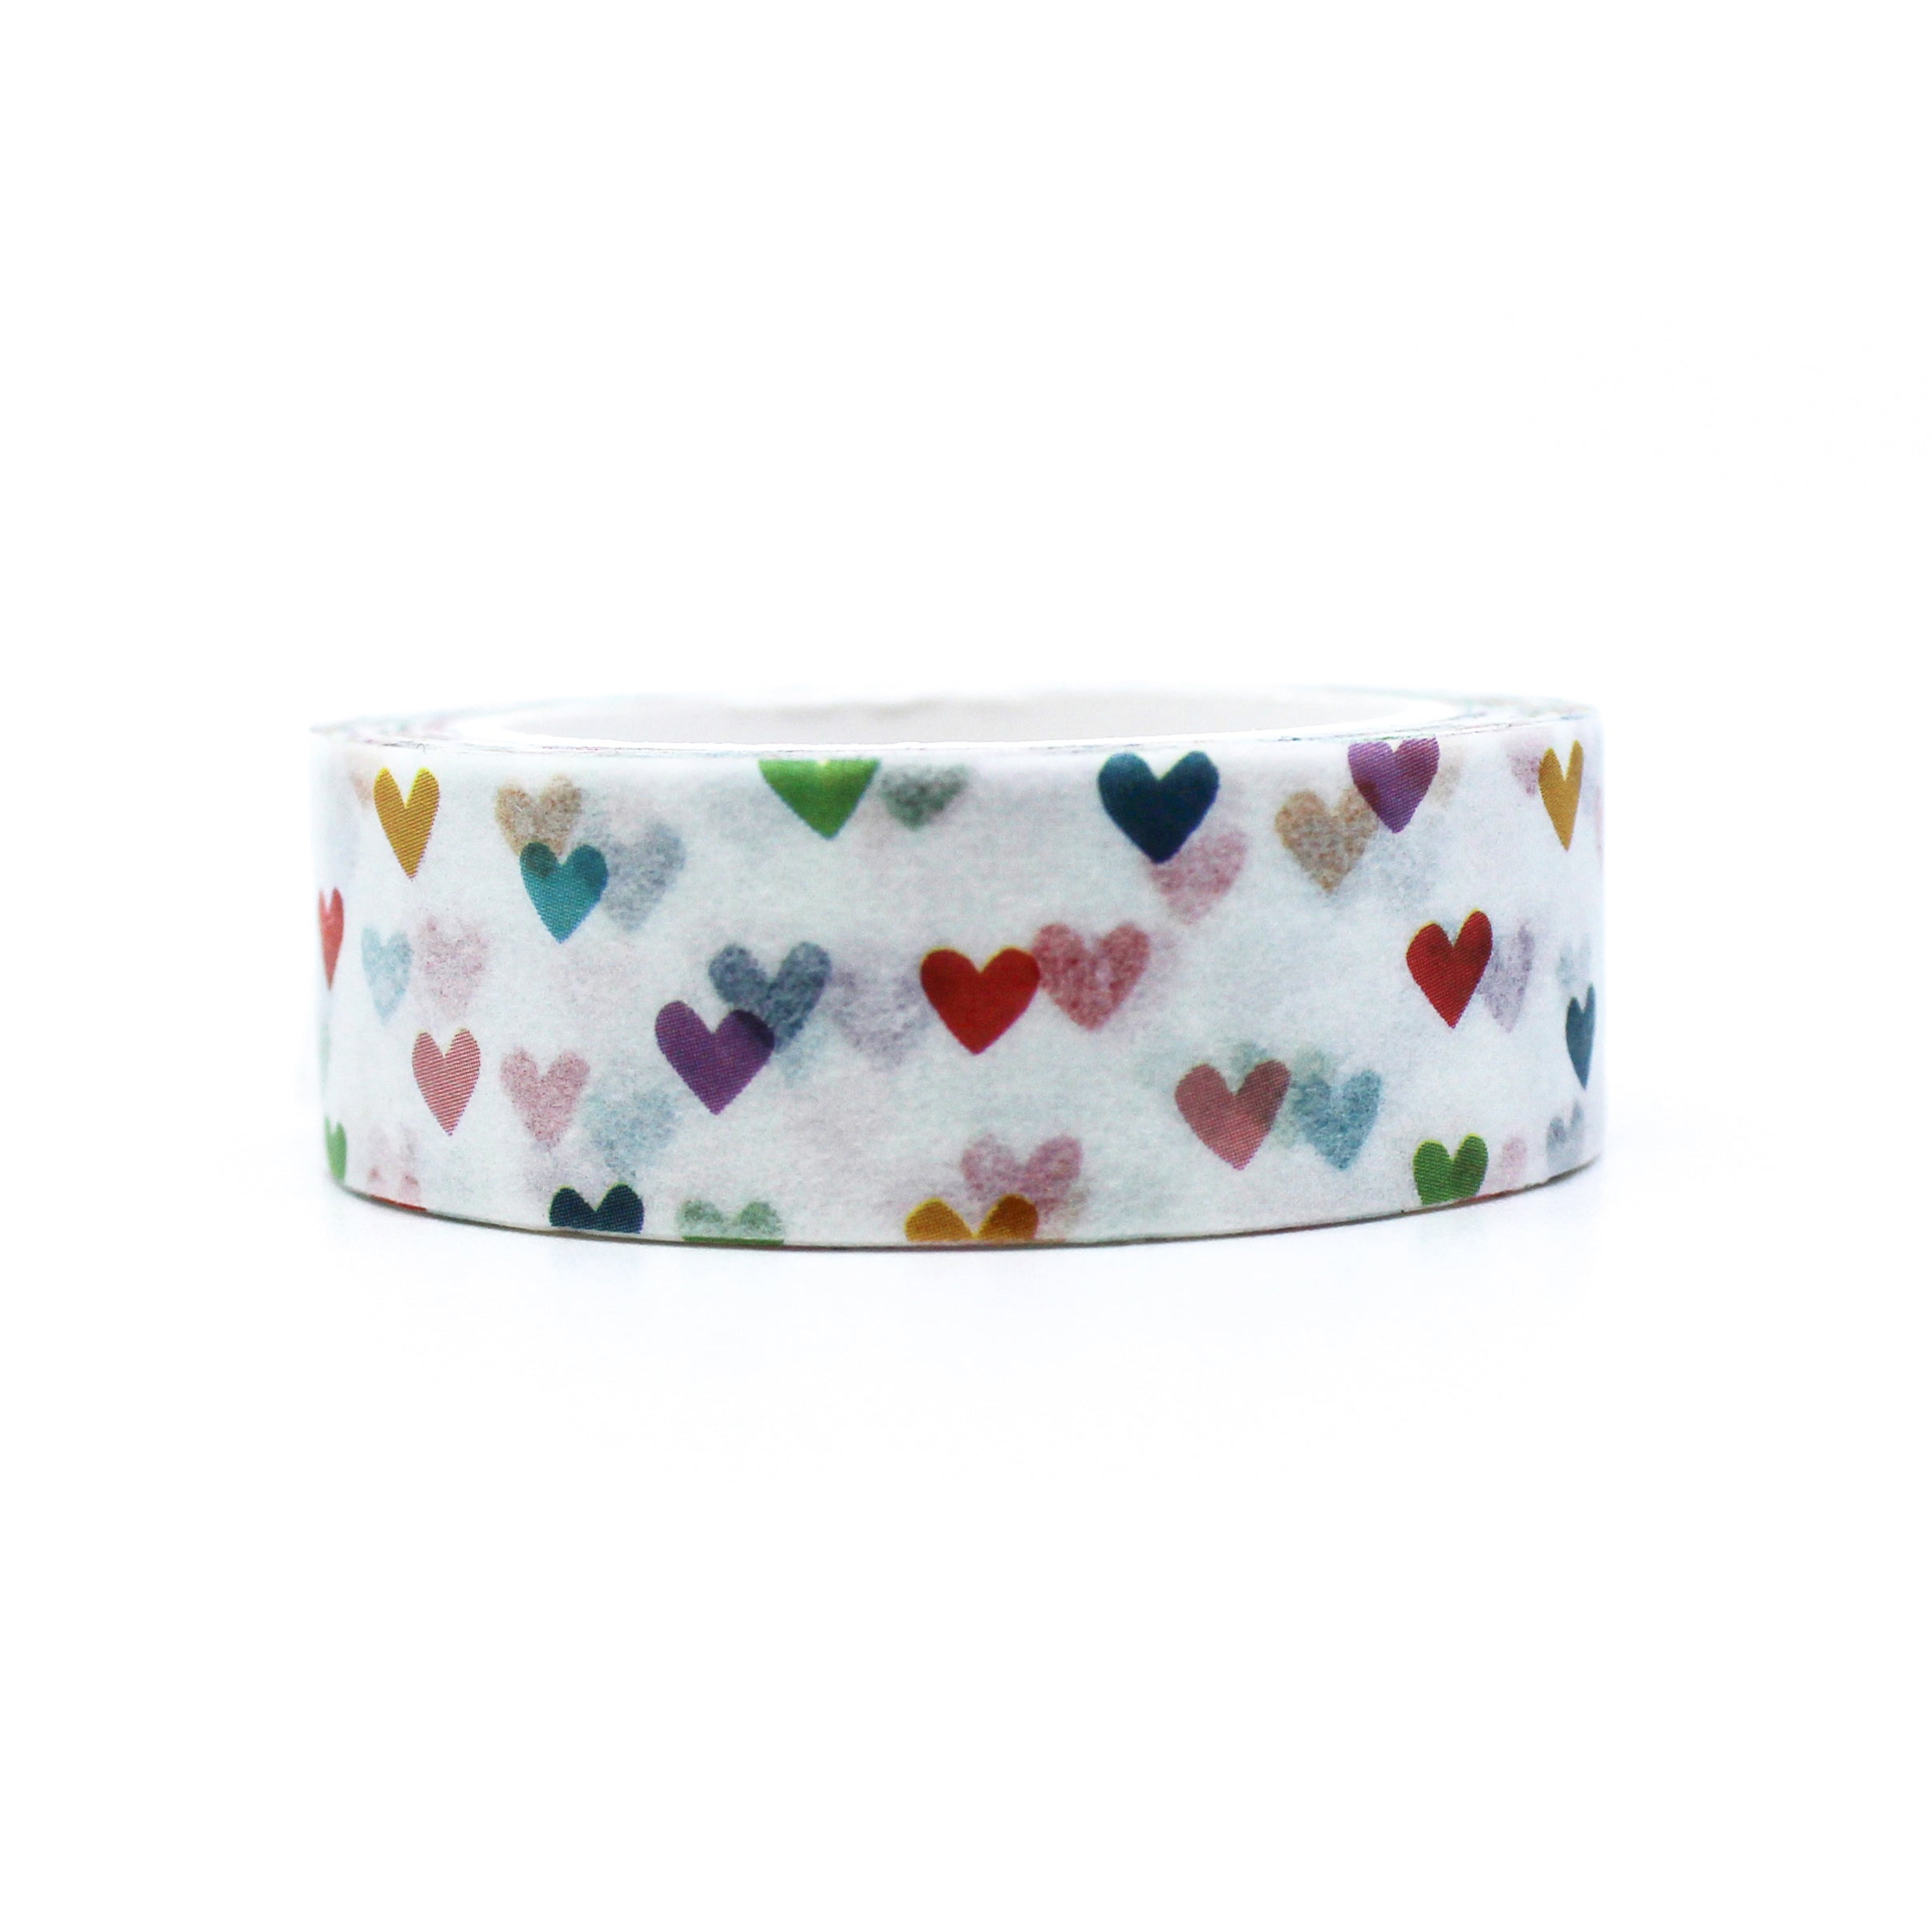 This is the front view of our colorful tiny rainbow hearts washi tape from BBB Supplies craft and journaling shop.